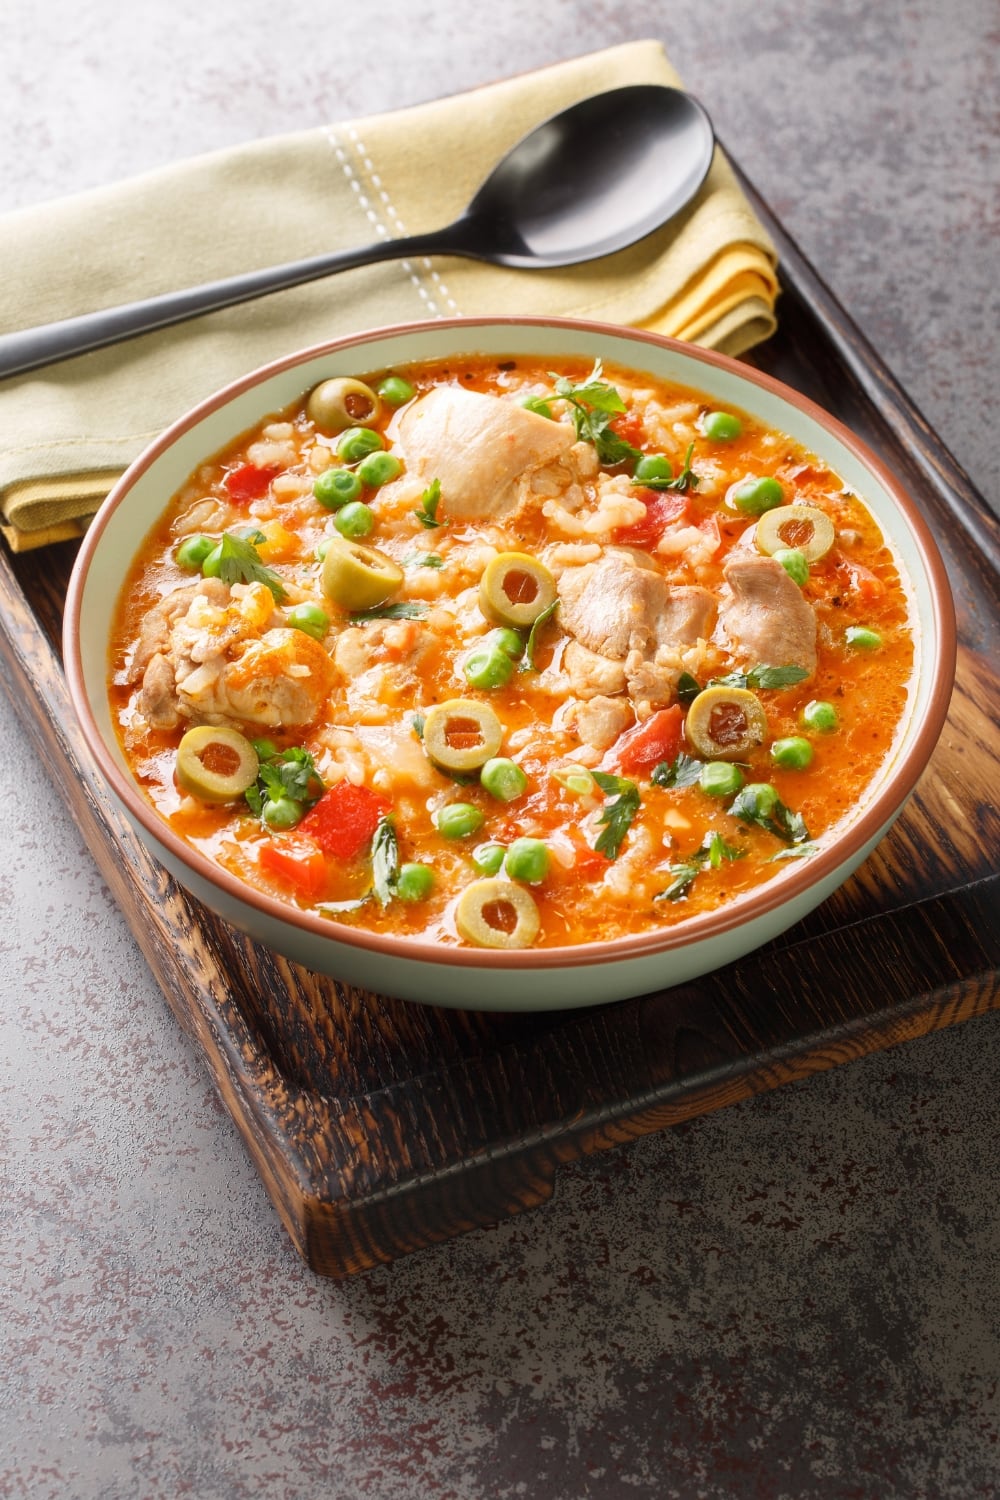 Bowl Traditional Puerto Rican Asopao de Pollo Made With Rice, Chicken, Olives, Green peas and Tomatoes